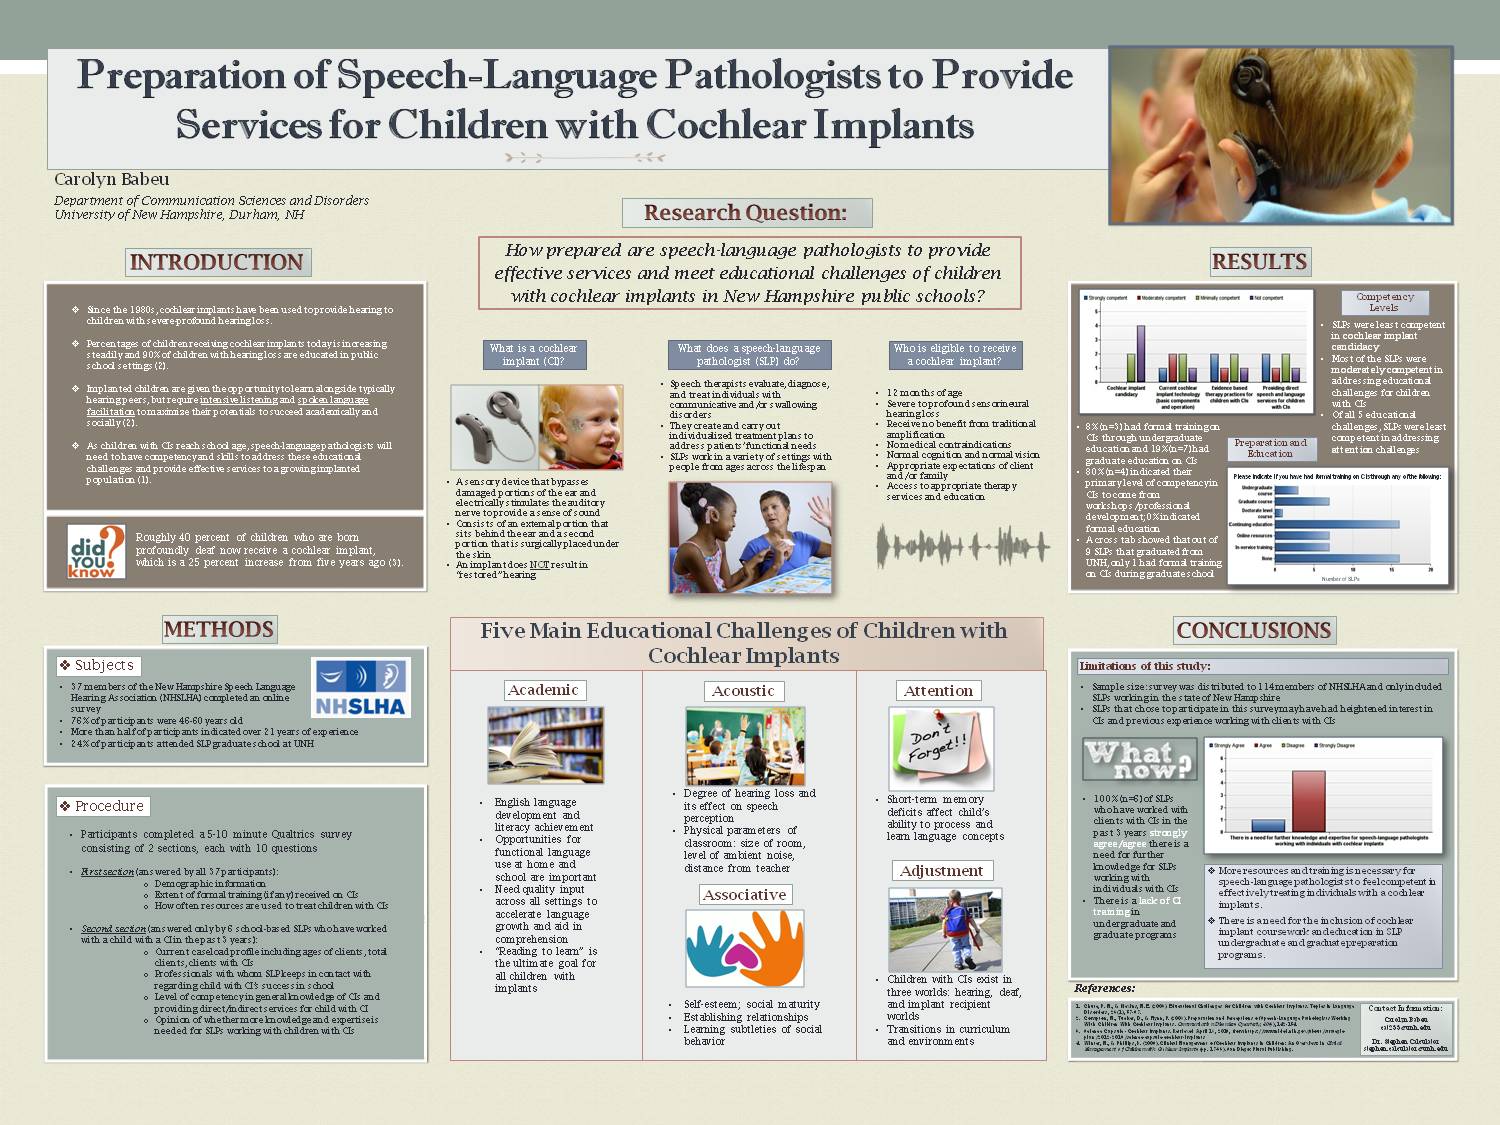 Preparation Of Speech-Language Pathologists To Provide Services To Children With Cochlear Implants by cat233